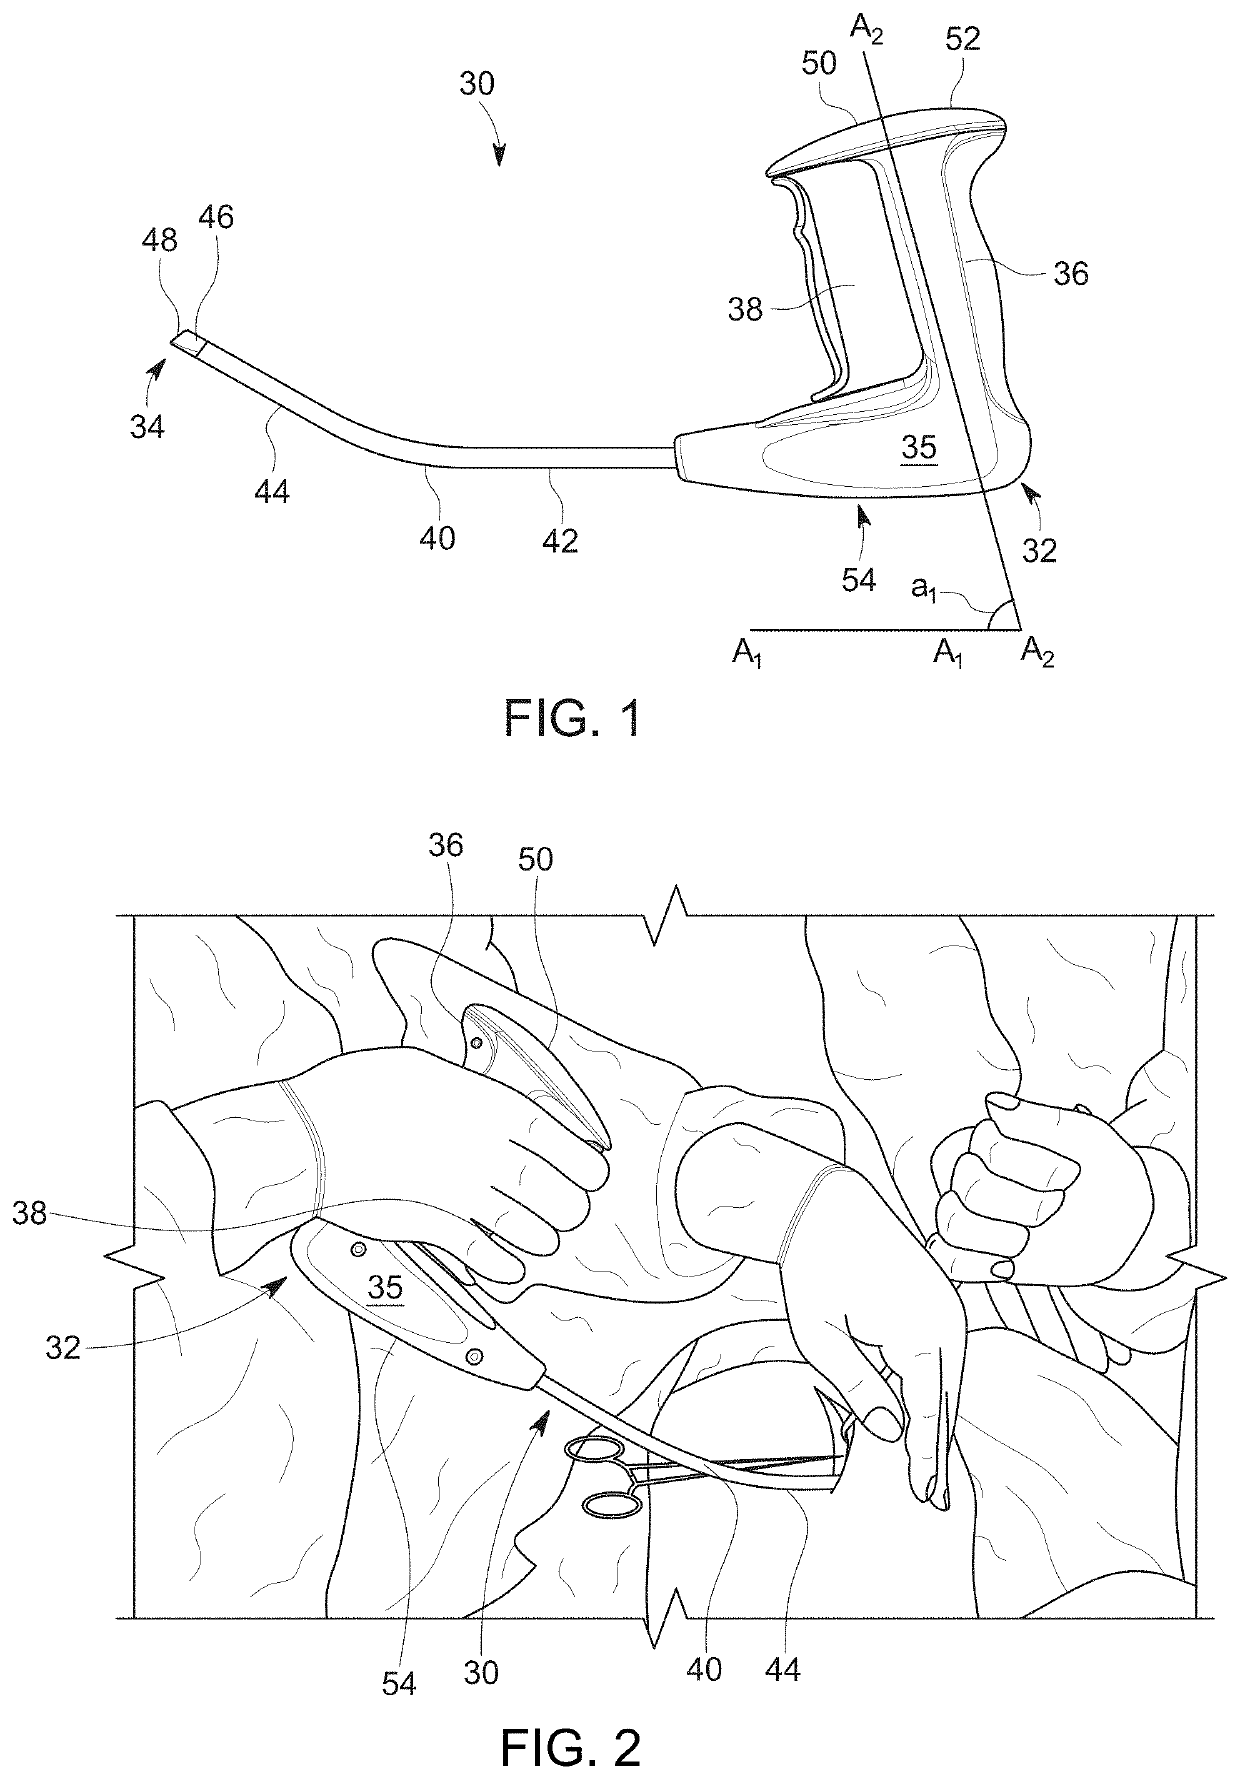 Applicator instruments with imaging systems for dispensing surgical fasteners during open repair procedures